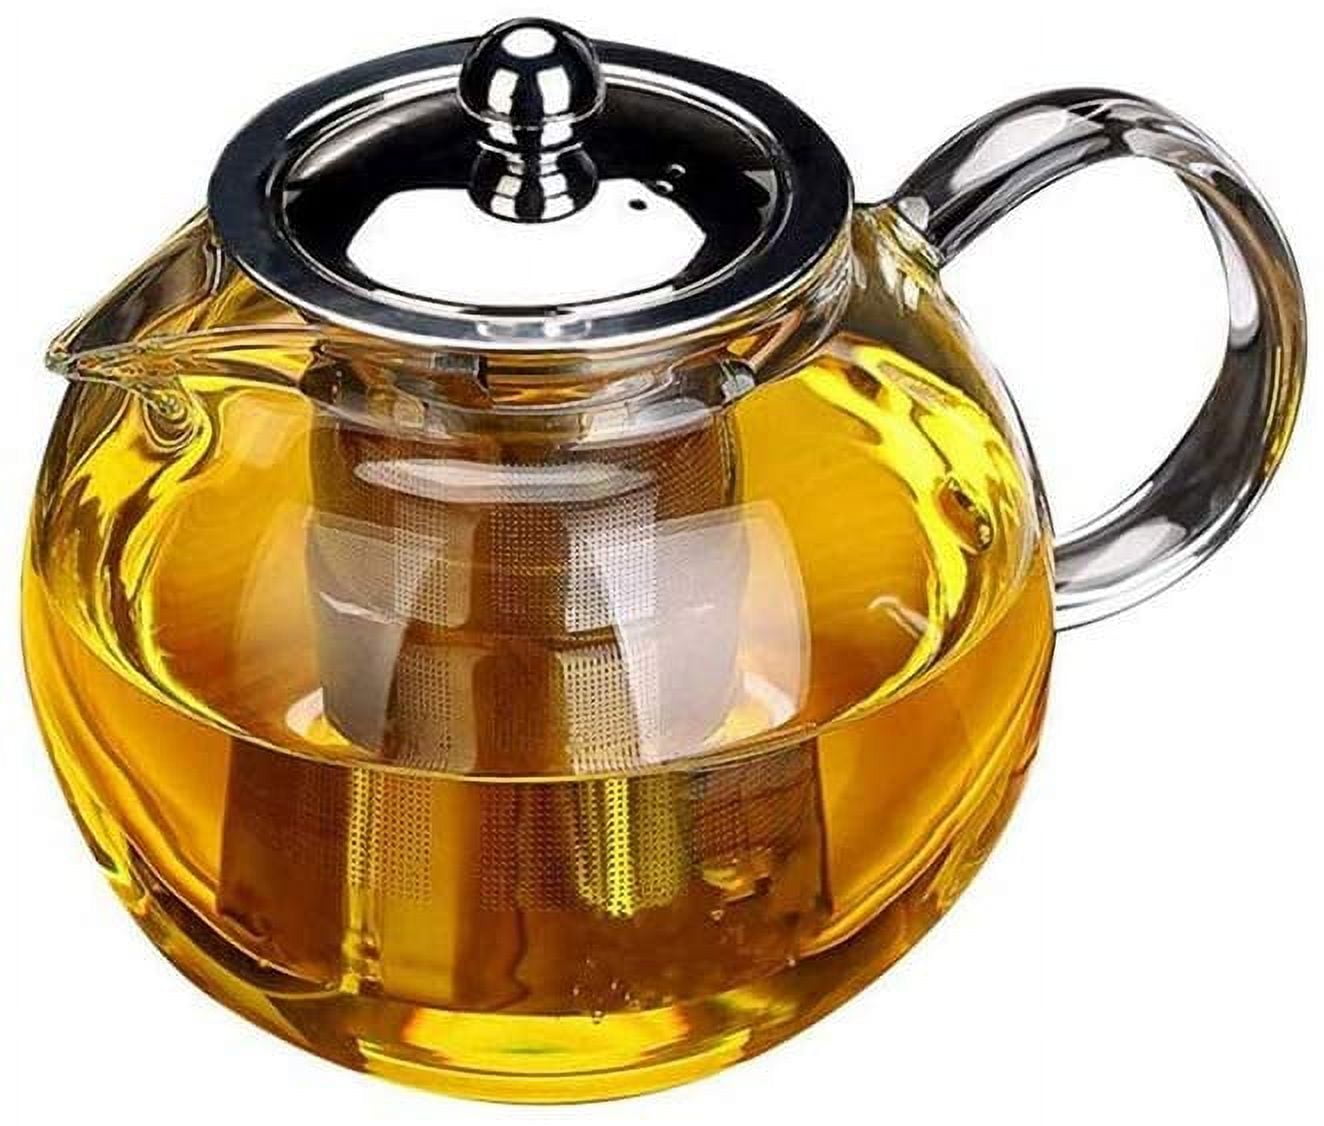 PARACITY Glass Teapot Stovetop, Borosilicate Clear Tea Kettle  with Removable Stainless Steel Infuser,Teapot Blooming and Loose Leaf Tea  Maker Tea Brewer, Gift for Family and Friends, 20oz/600ml: Teapots